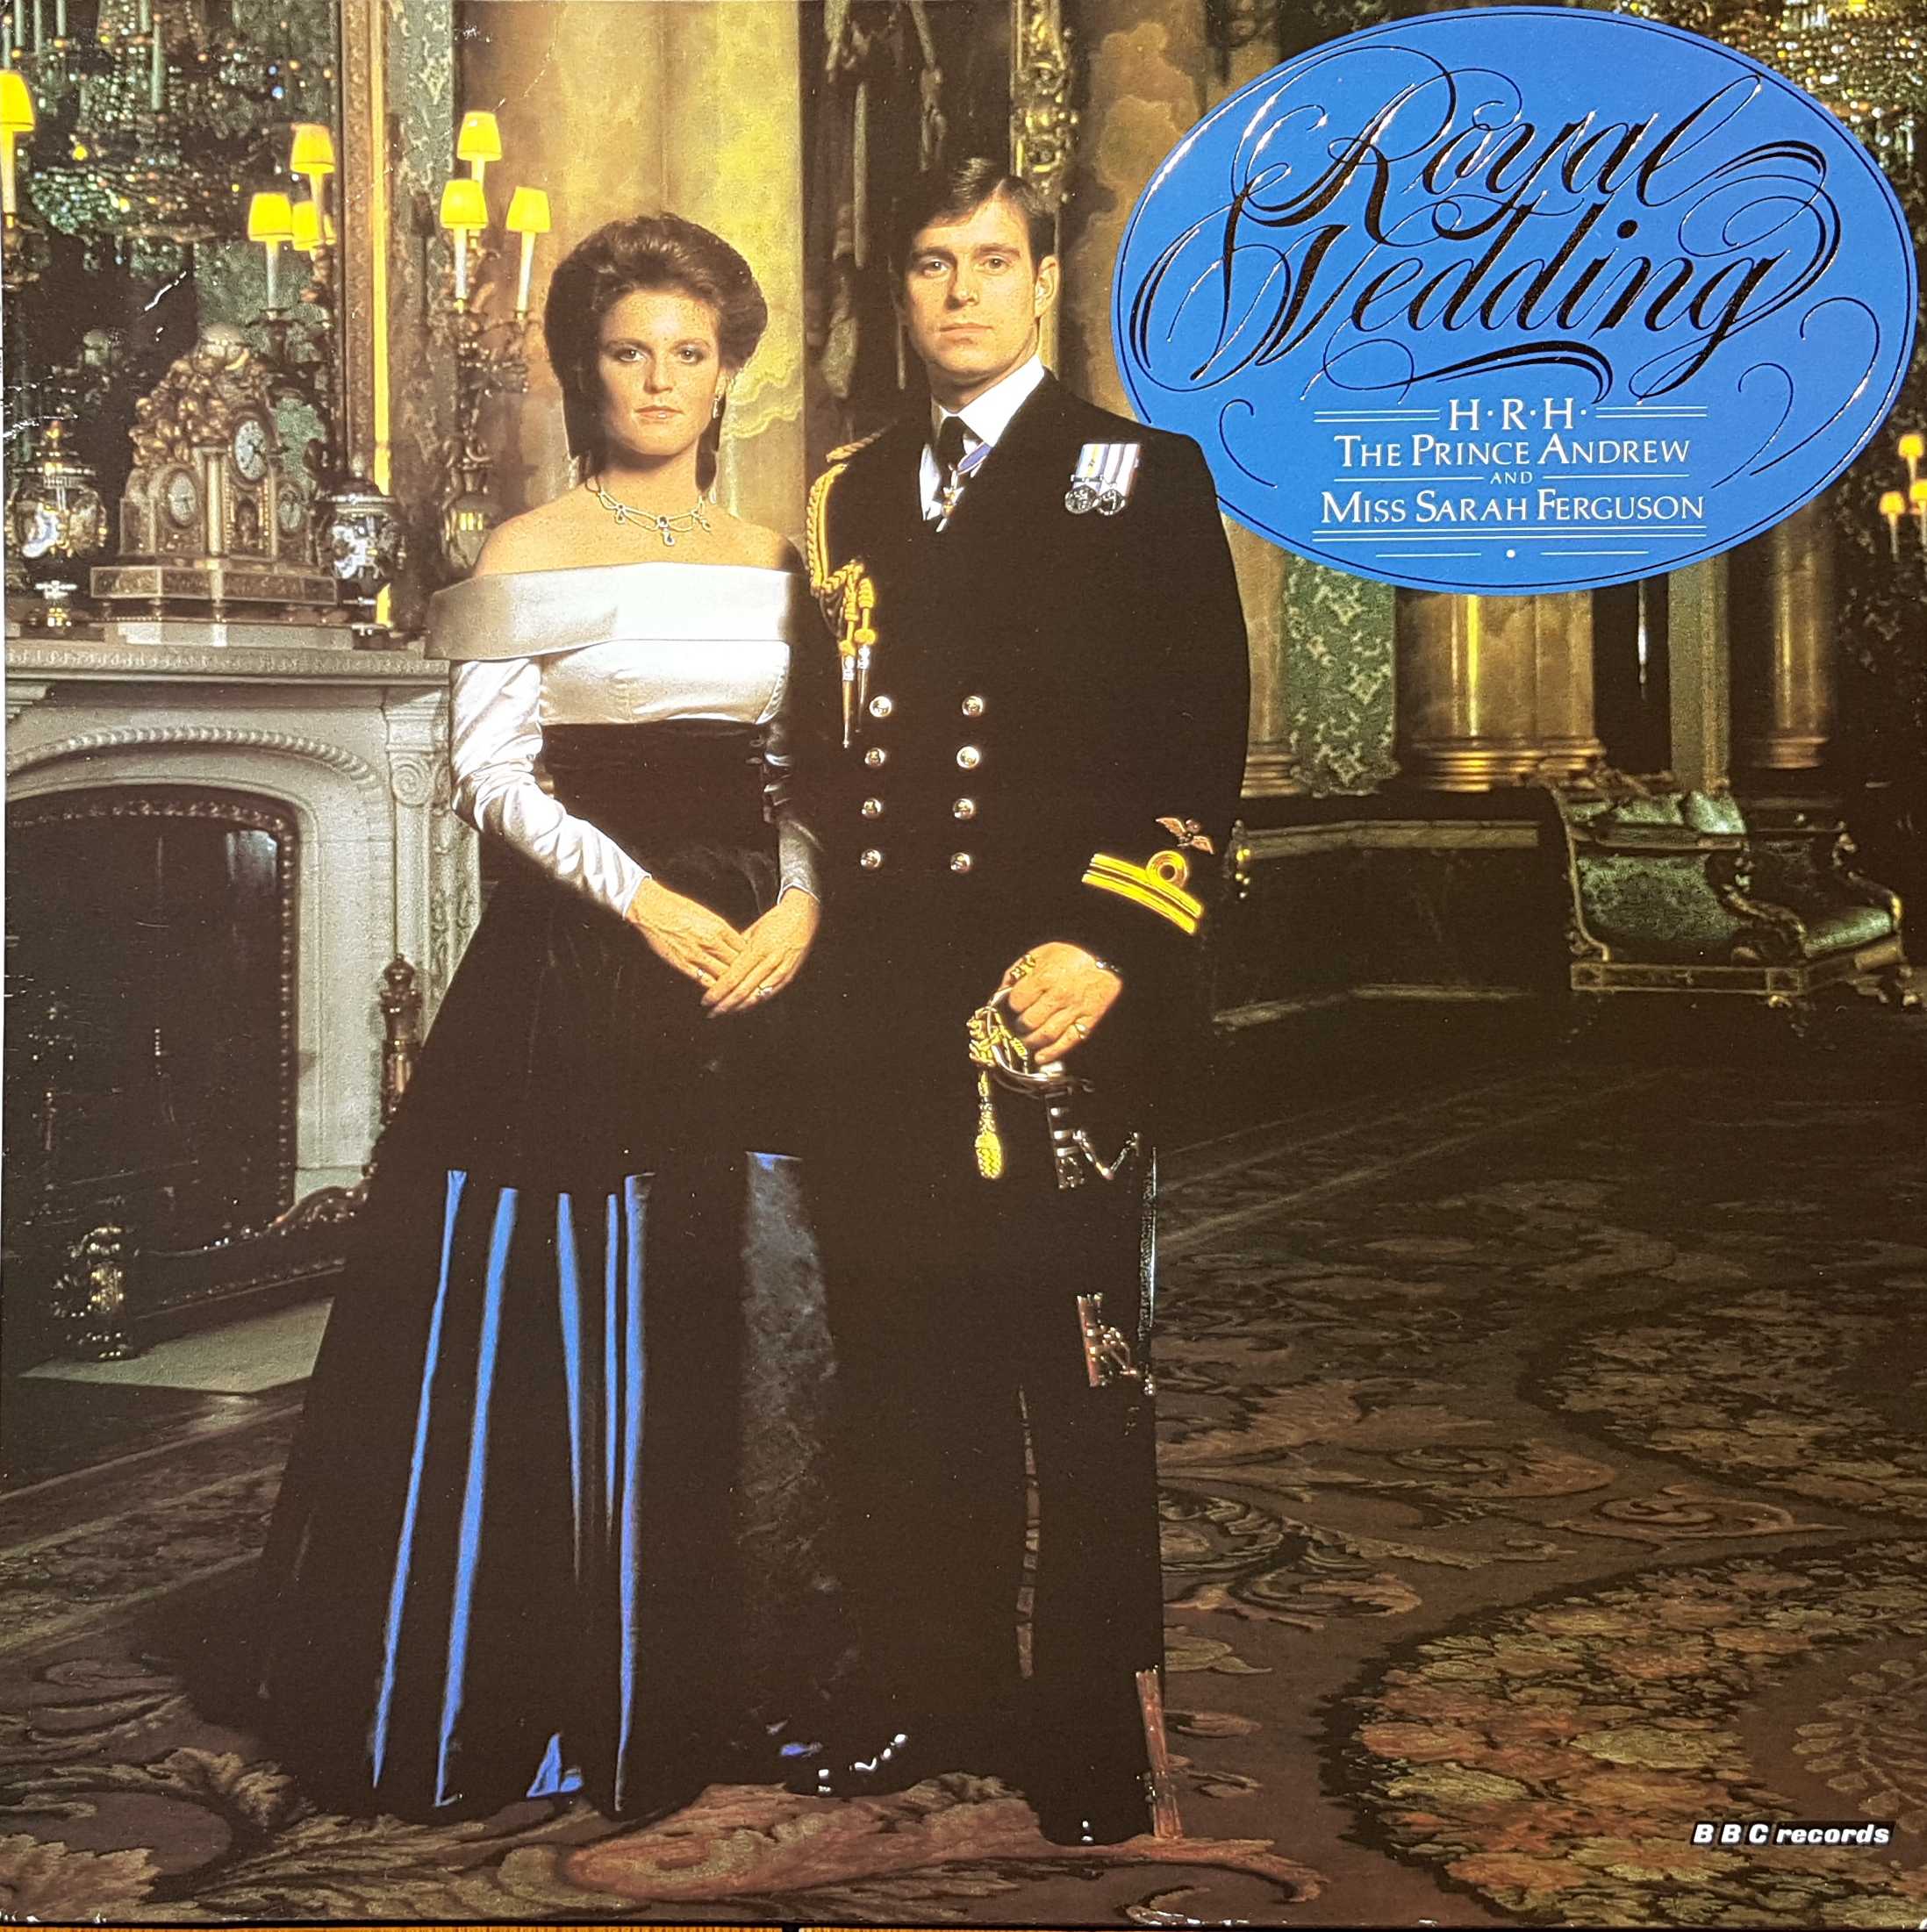 Picture of REP 596 Royal wedding - Prince Andrew / Sarah Ferguson by artist Various from the BBC albums - Records and Tapes library